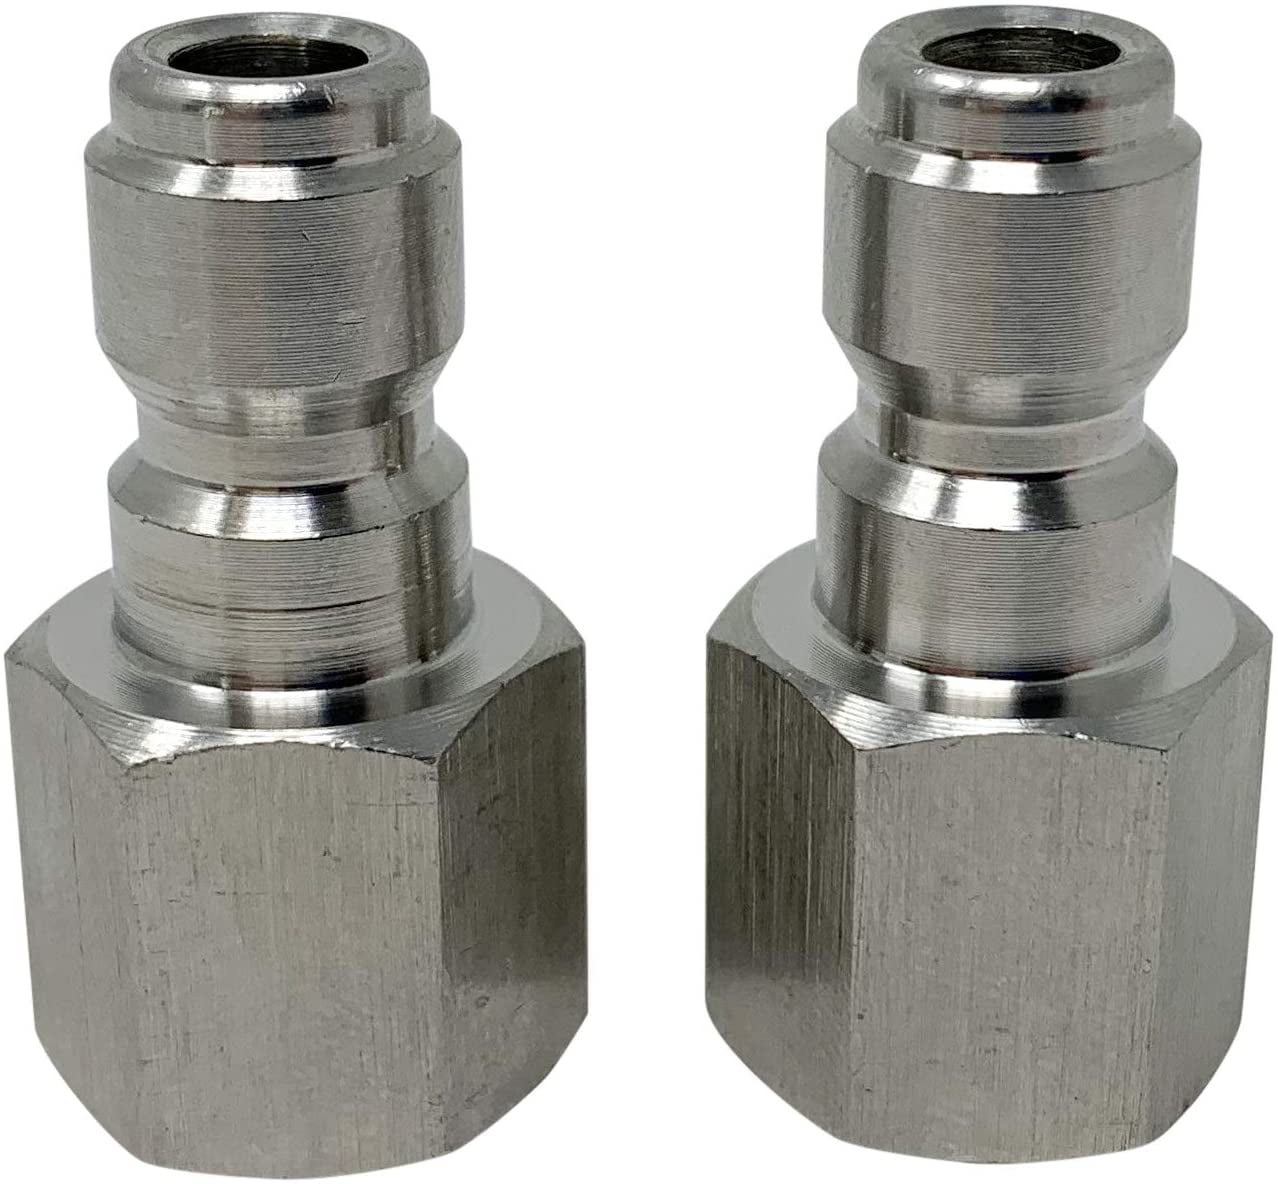 Stainless Steel 1/4" NPT Female Quick Connect Plug Nipple Couplers Couplings 